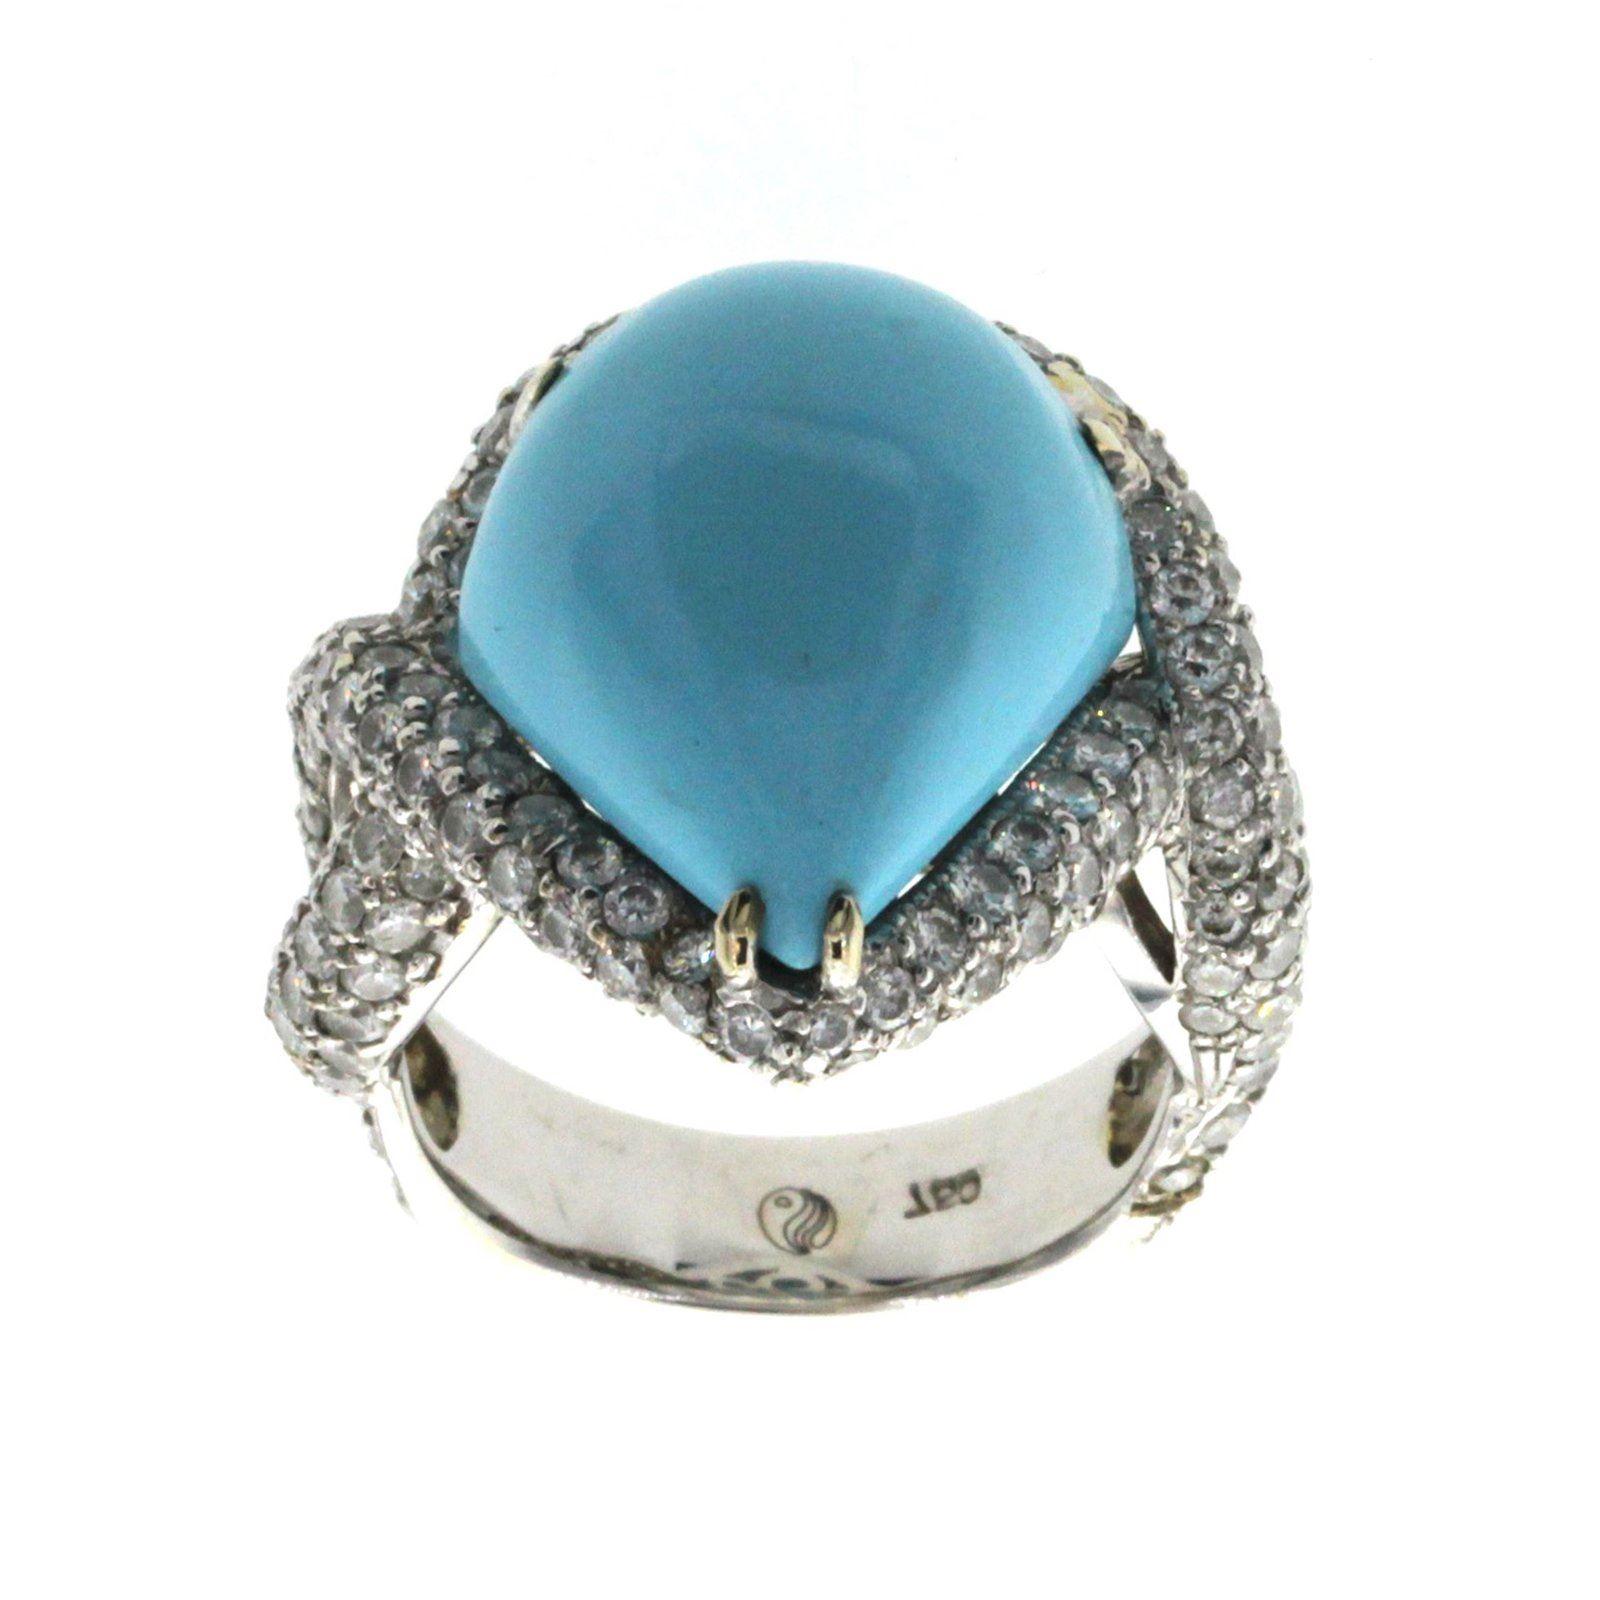 Top: 22 mm
Band Width: 5 mm
Metal: 18K White Gold 
Size: 7.5
Hallmarks: 750
Total Weight: 12.9 Grams
Center Stone: 12.14 CT US Natural Turquoise
Side Stone: 1.86 Ct G SI1 Diamonds 
Condition: New
Estimated Retail Price: $5600
Stock Number: K-1